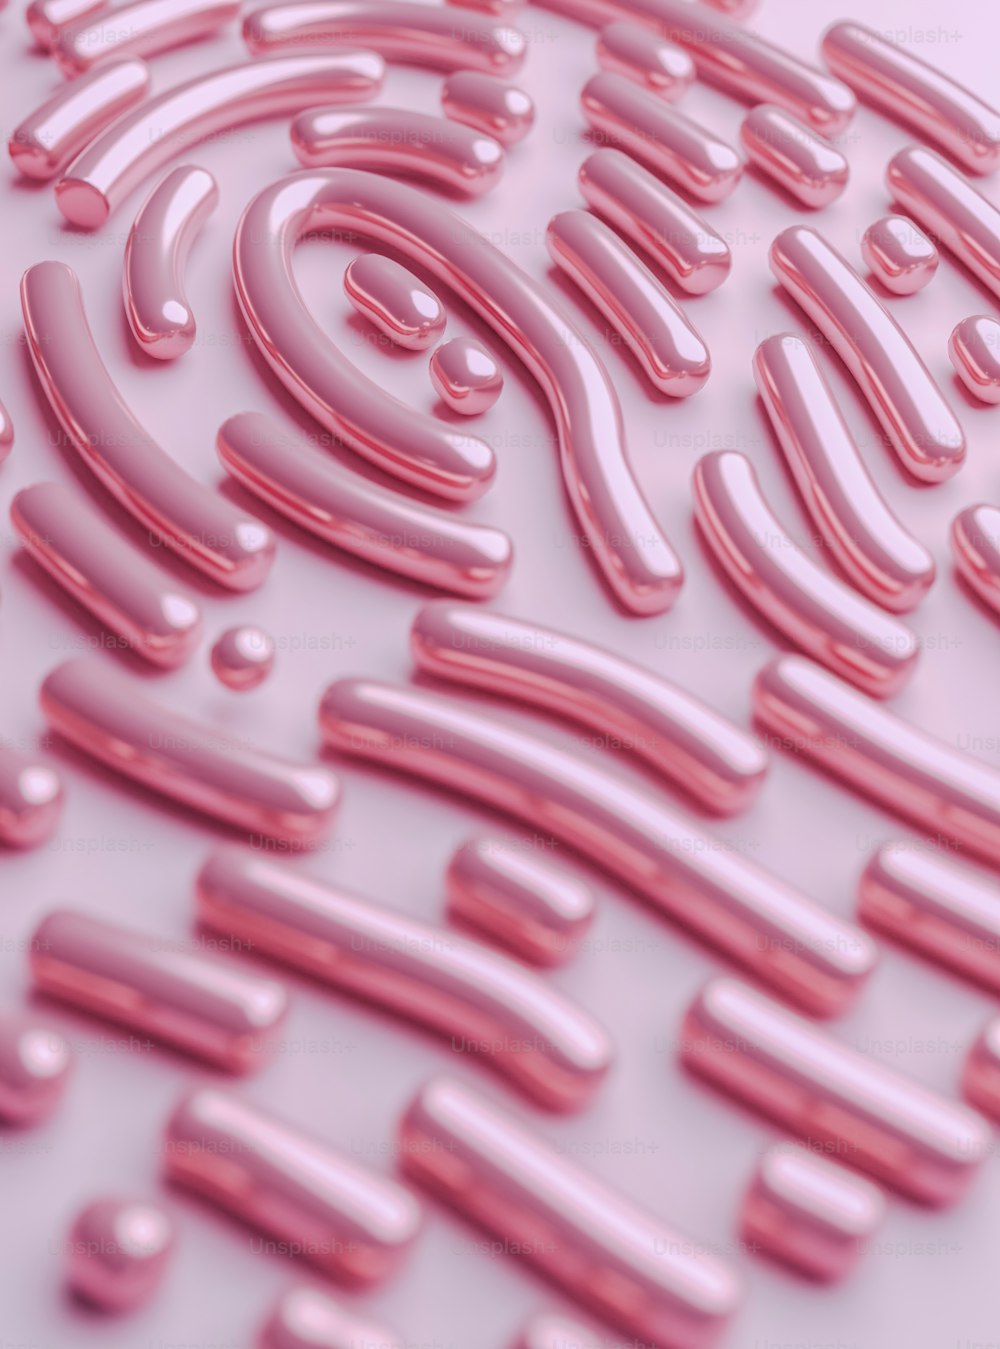 a close up of a pink pattern on a white surface